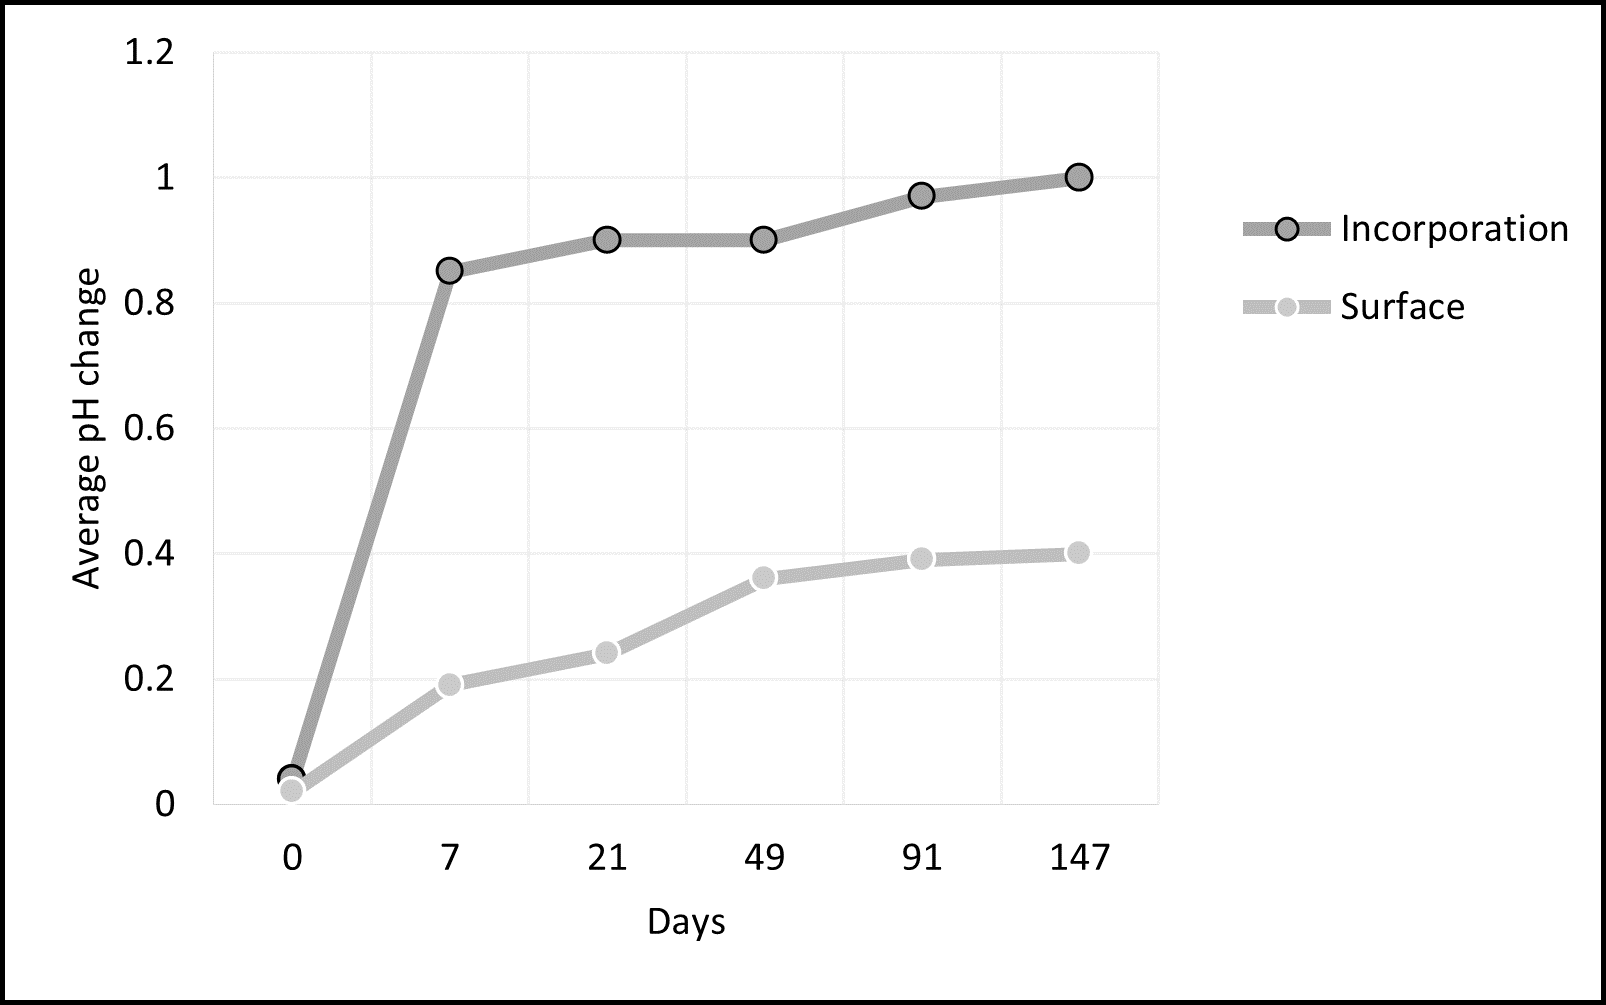 Application method of lime (incorporated and surface) showing average pH change over time (days) at Mt Mercer.